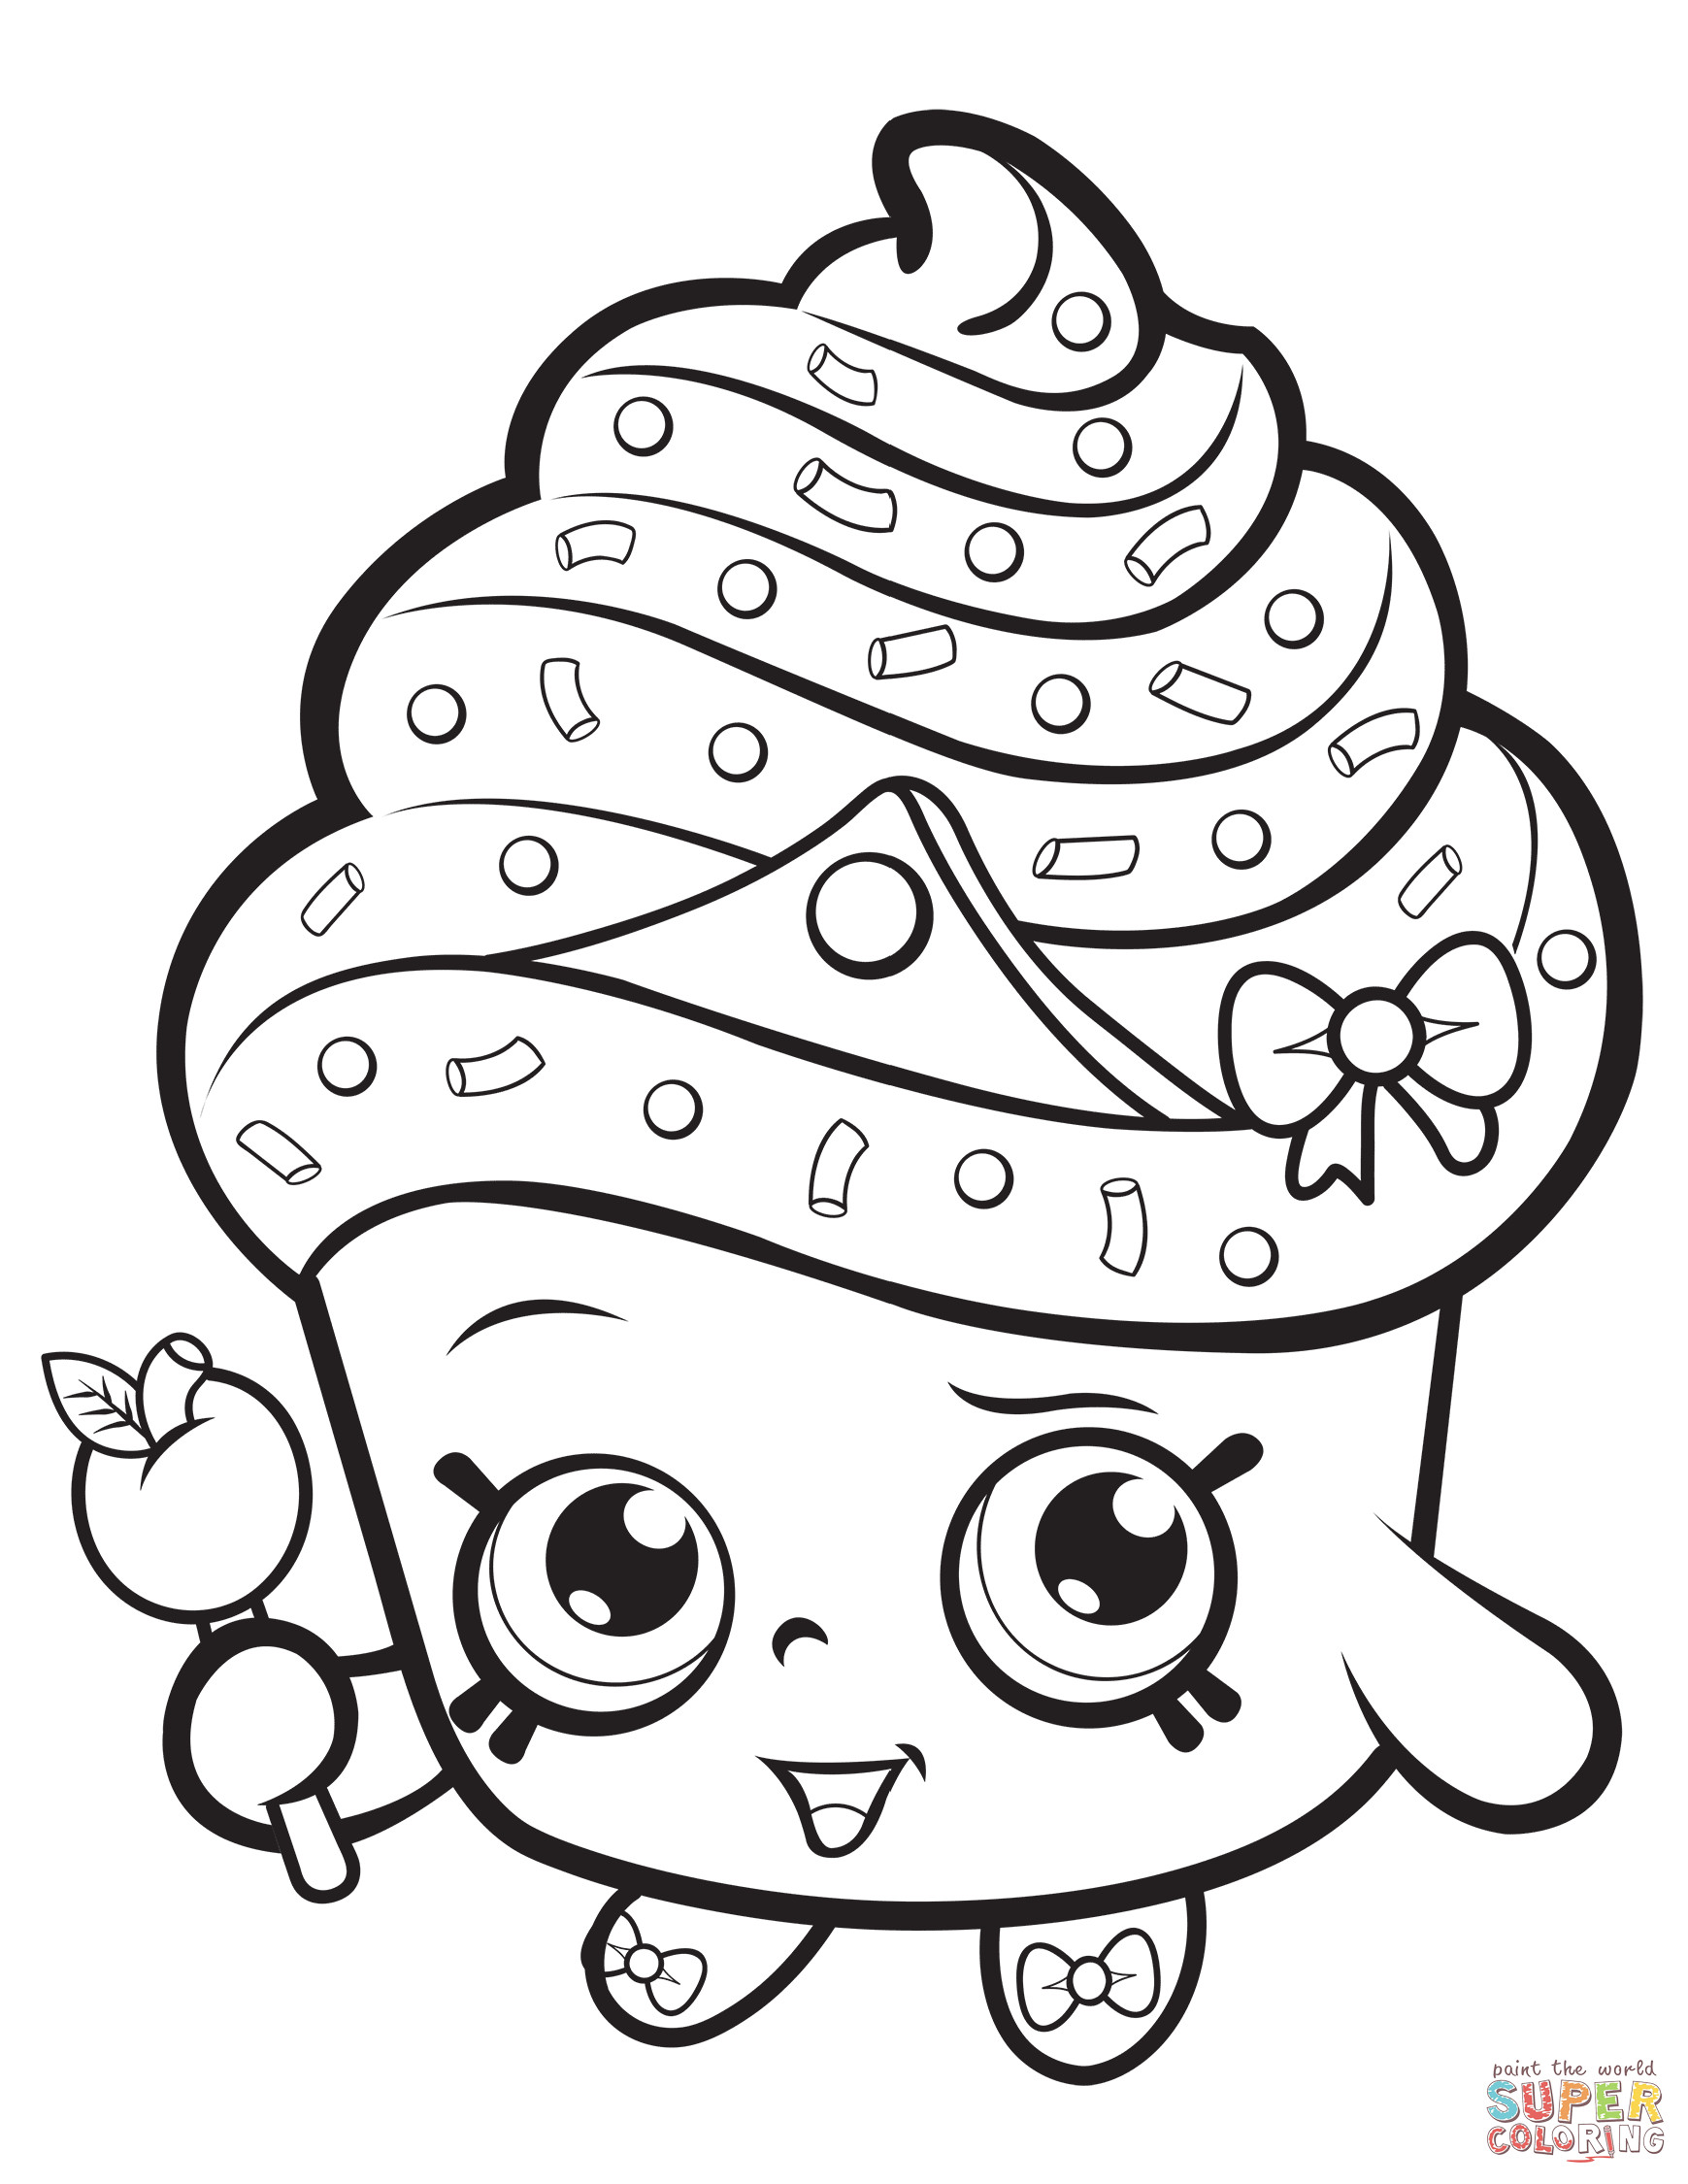 Printable Shopkin Coloring Pages
 Cupcake Queen Shopkin coloring page